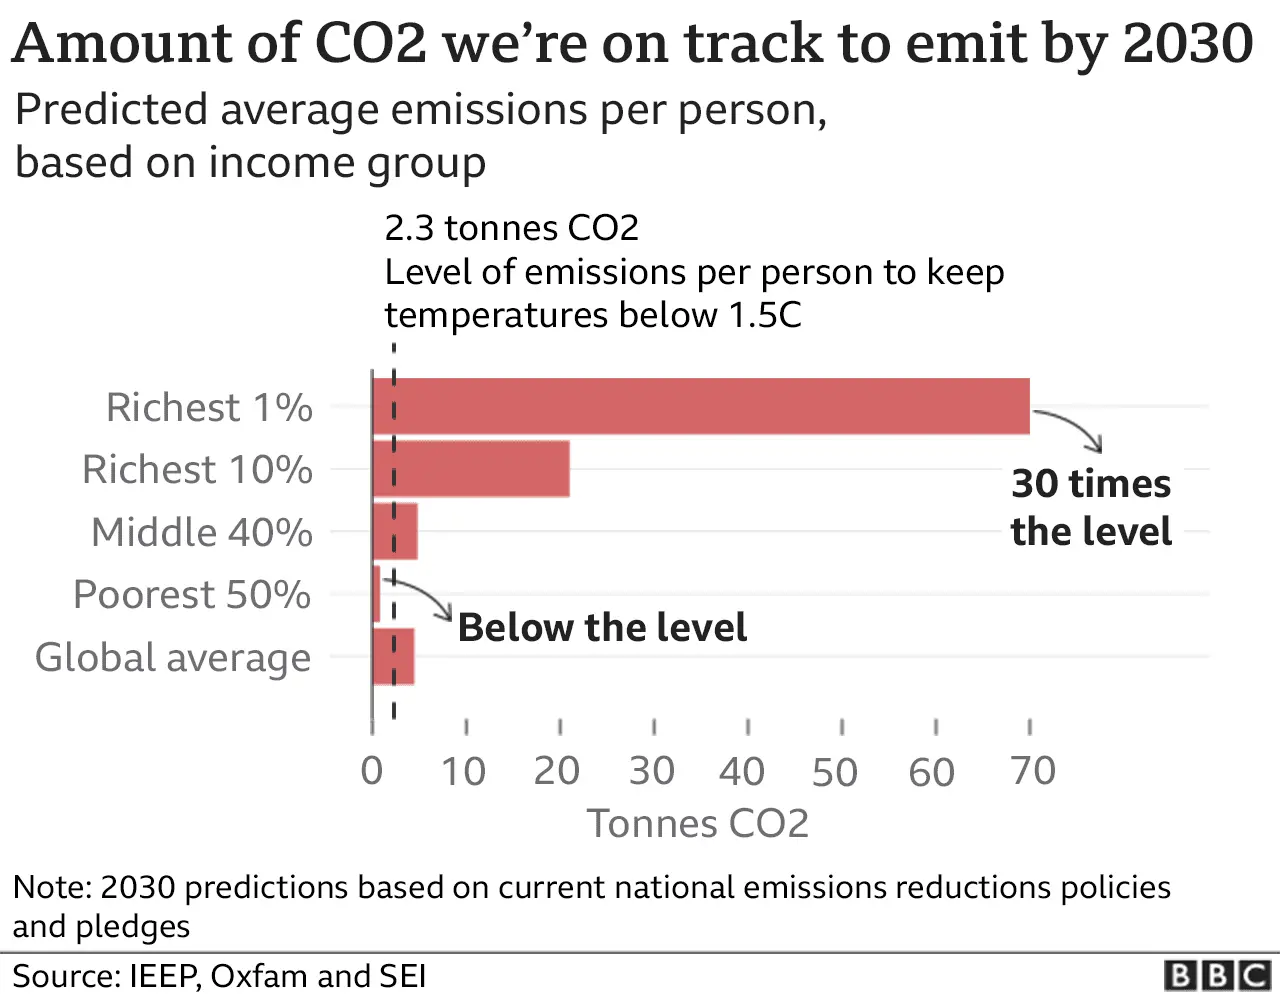 A graph showing the amount of CO2 each income group will emit by 2030 with the richest 1% thirty times over their individual share of 2.3 tonnes